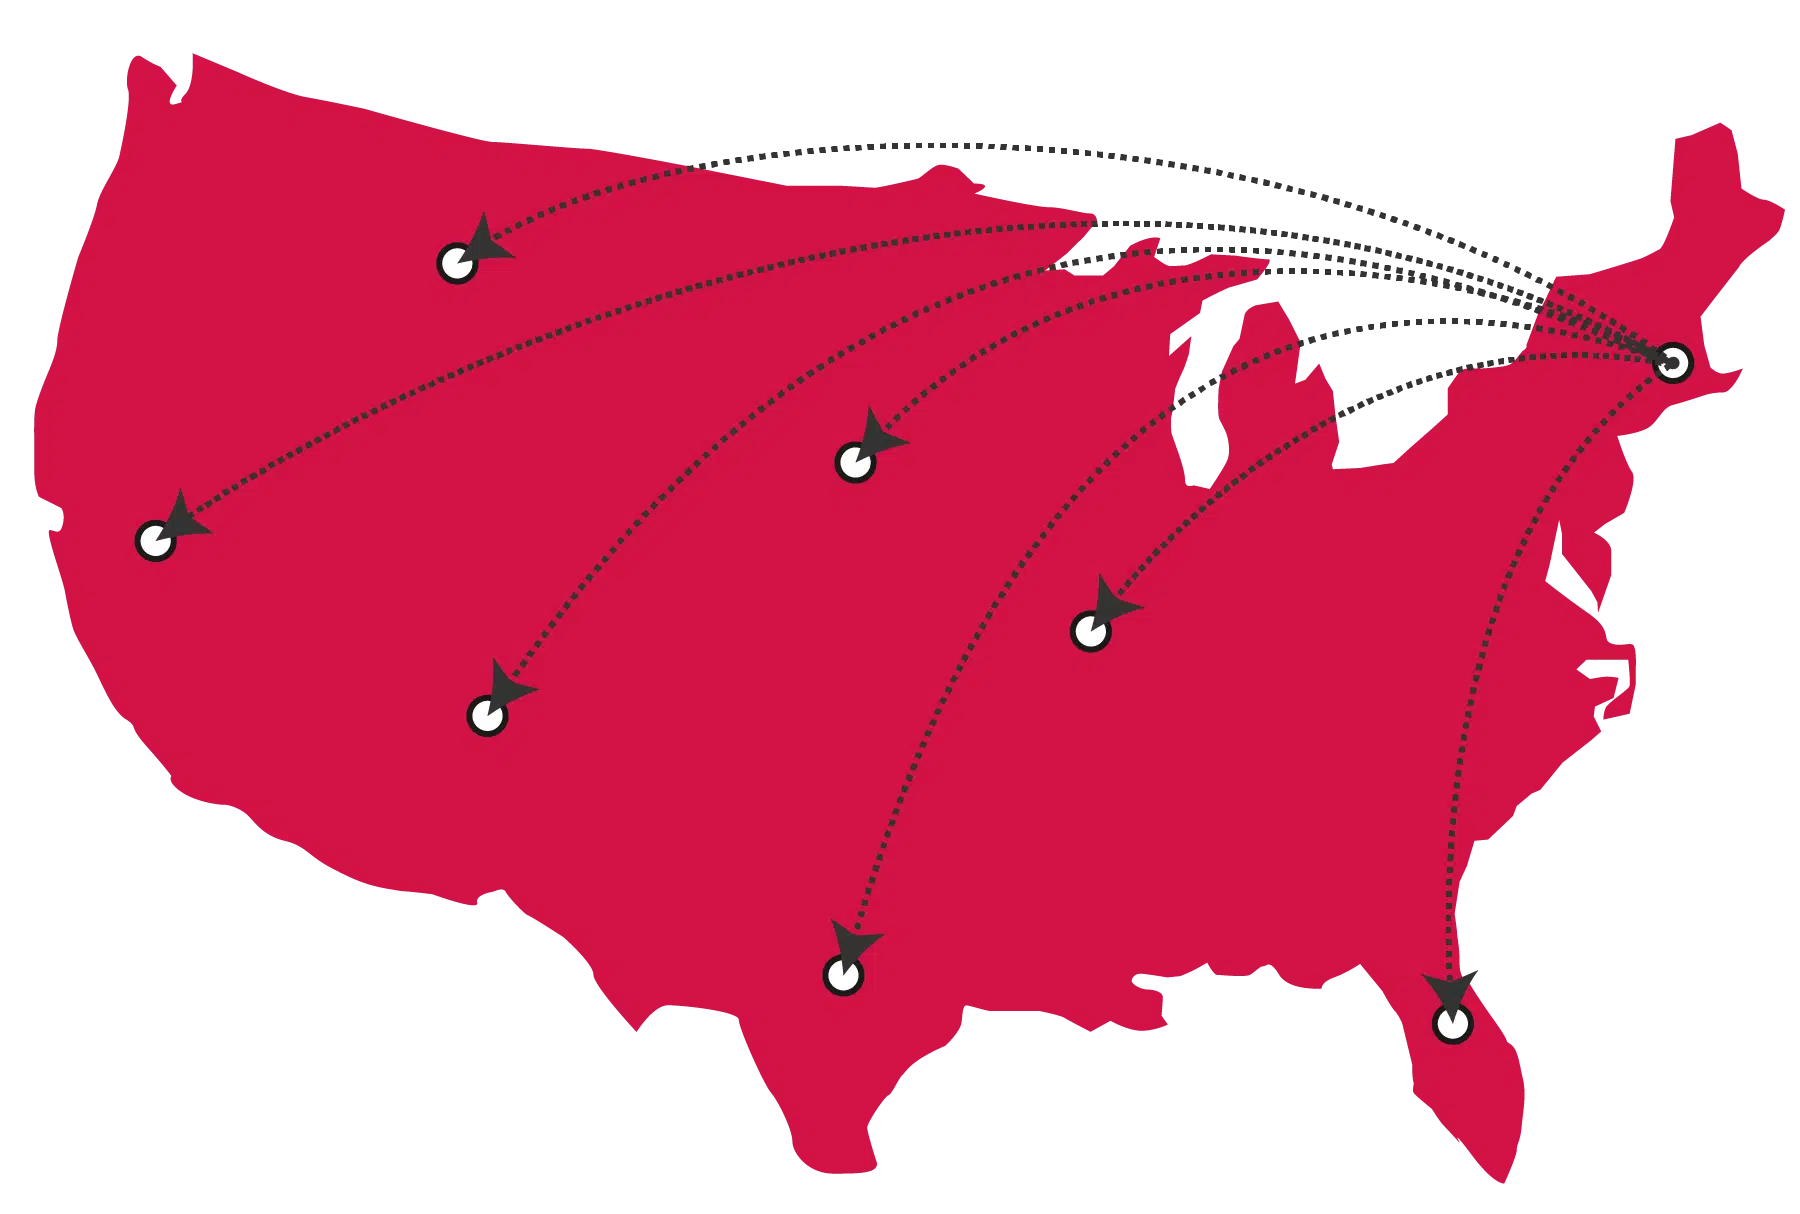 Map of the united states with 7 directional arrows originating in Massachusetts and landing in various spots across the country.